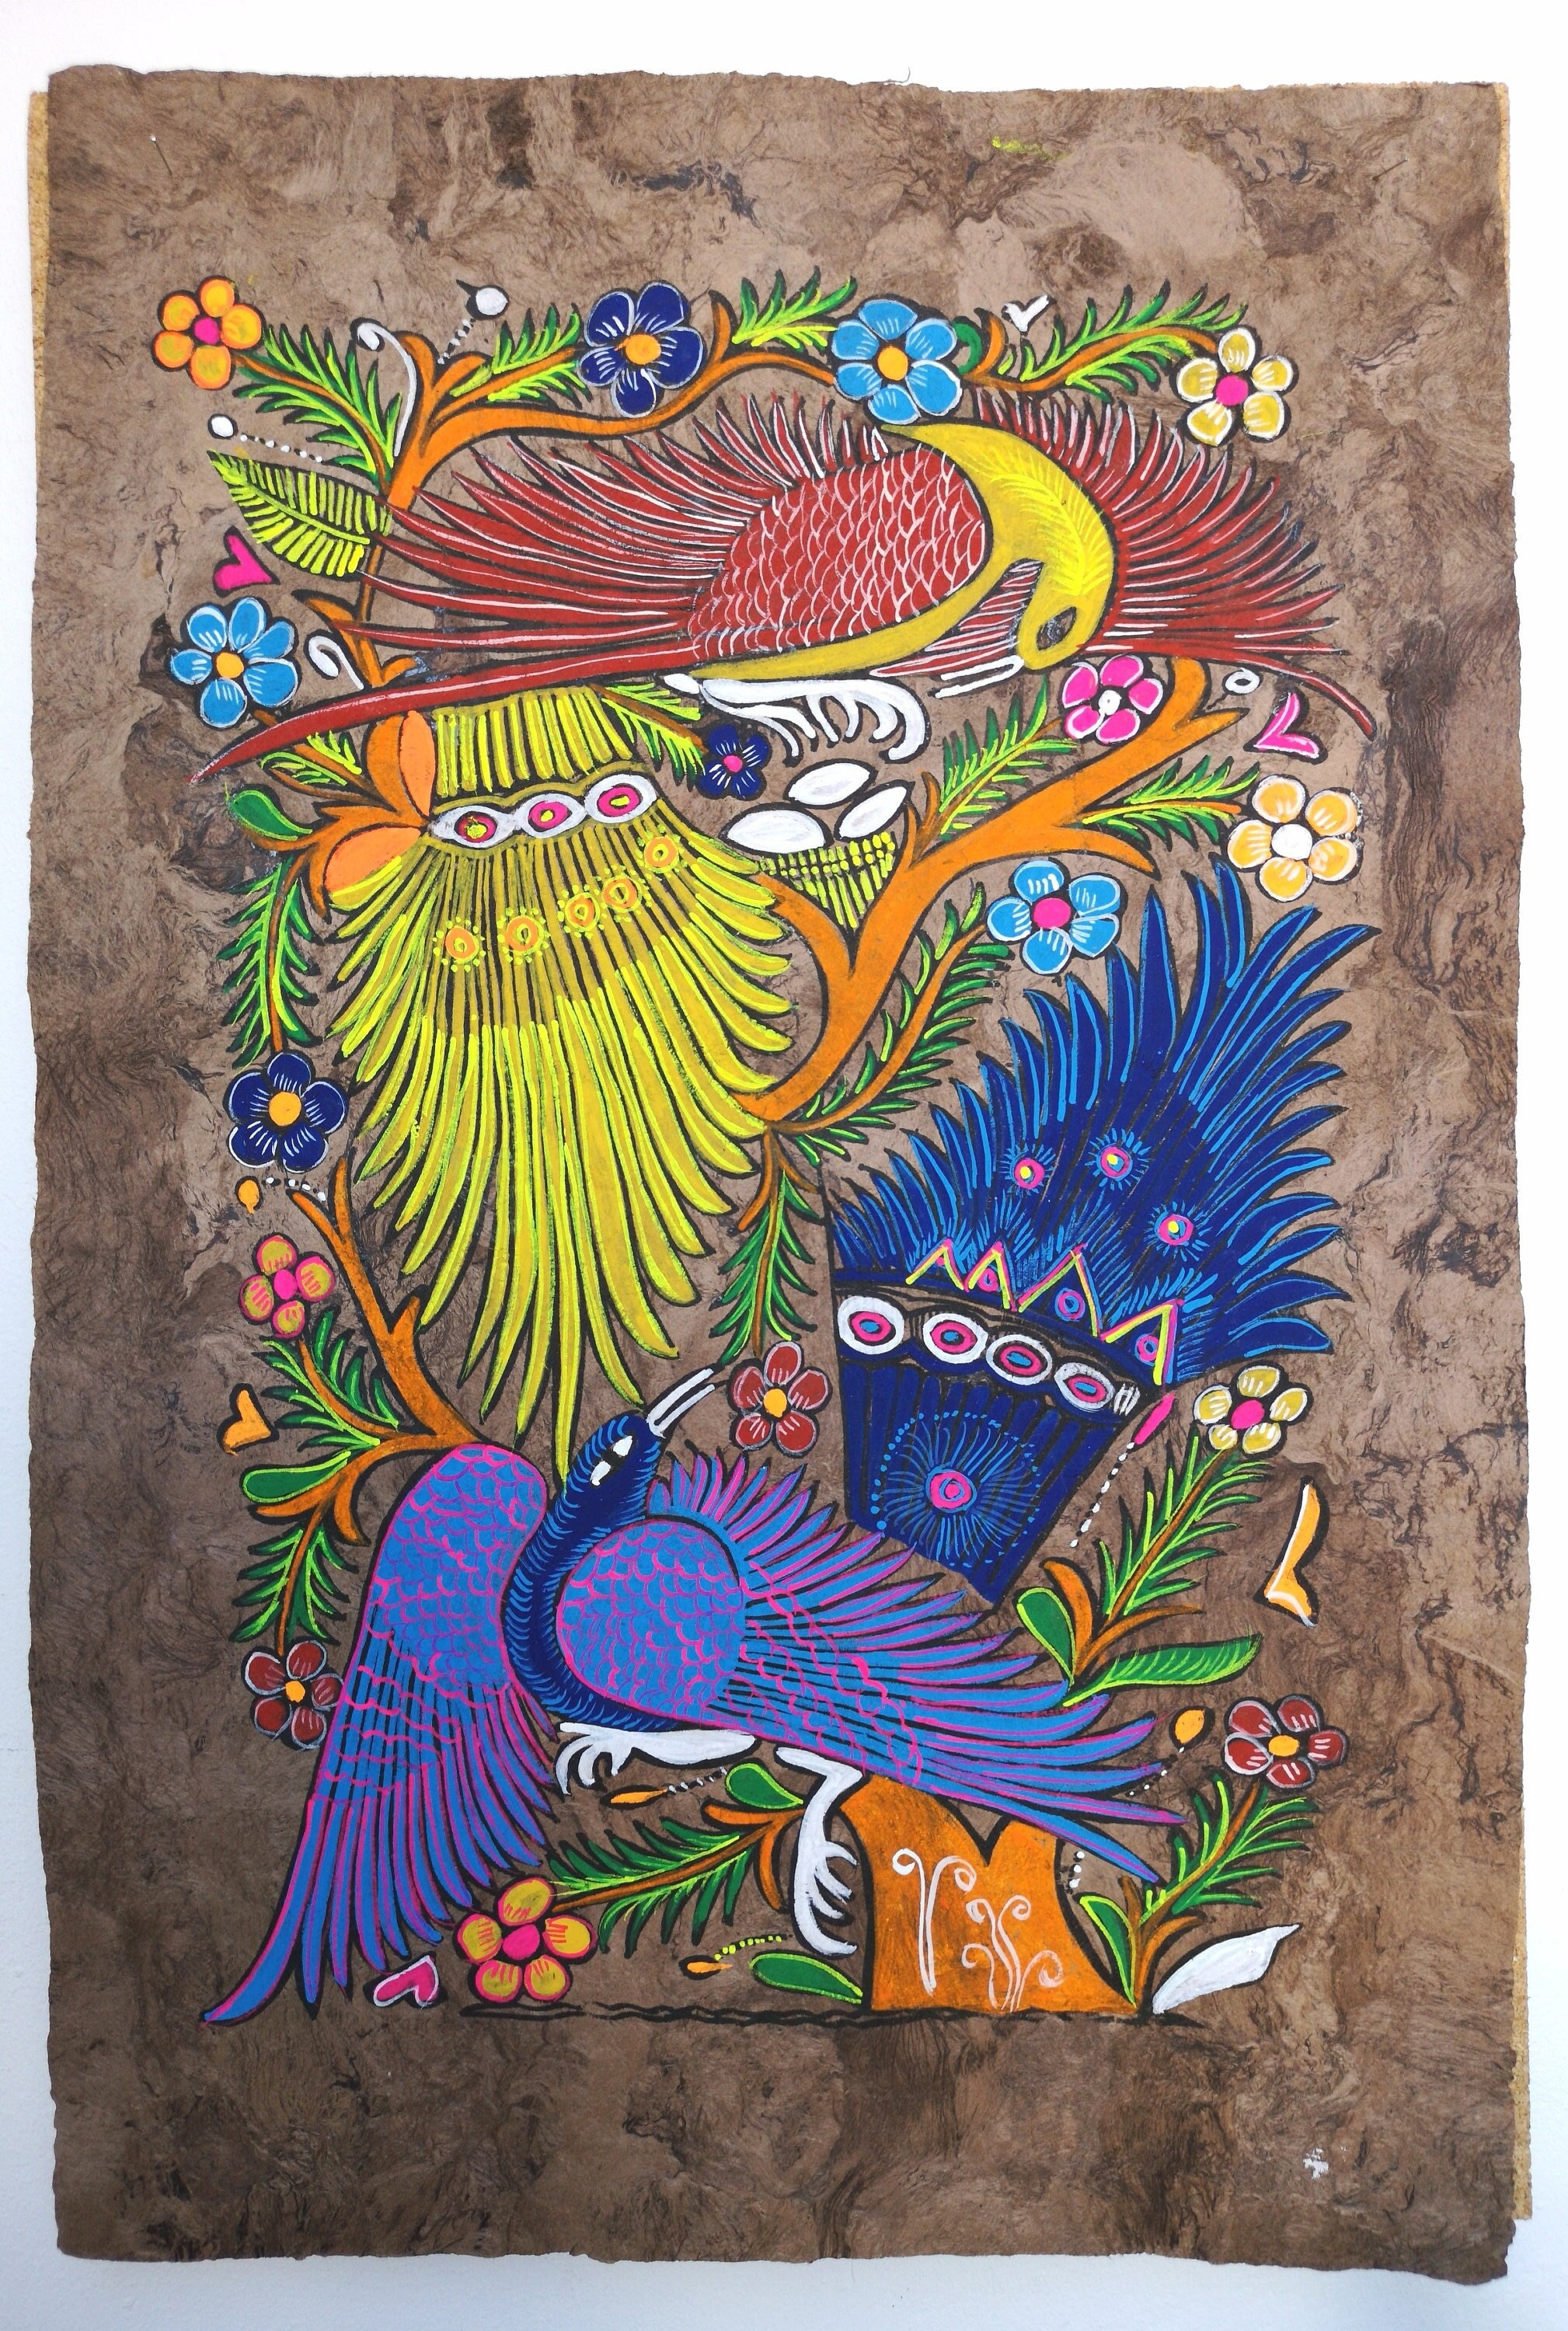 Best Peacock Acrylic Painting For Sale l Royal Thai Art